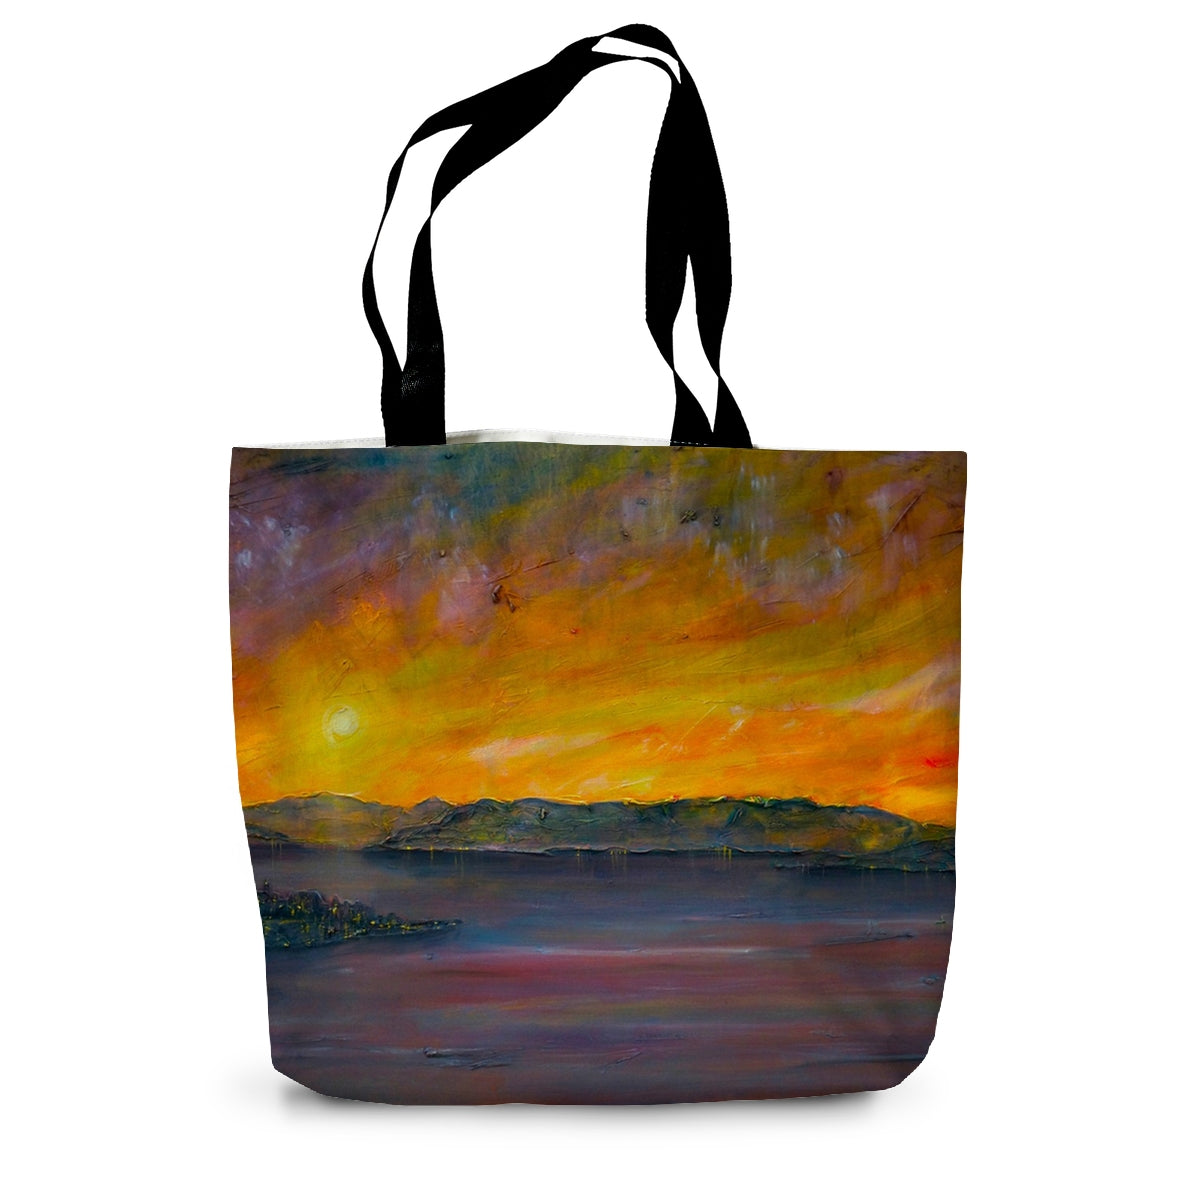 Sunset Over Gourock Art Gifts Canvas Tote Bag-Bags-River Clyde Art Gallery-14"x18.5"-Paintings, Prints, Homeware, Art Gifts From Scotland By Scottish Artist Kevin Hunter